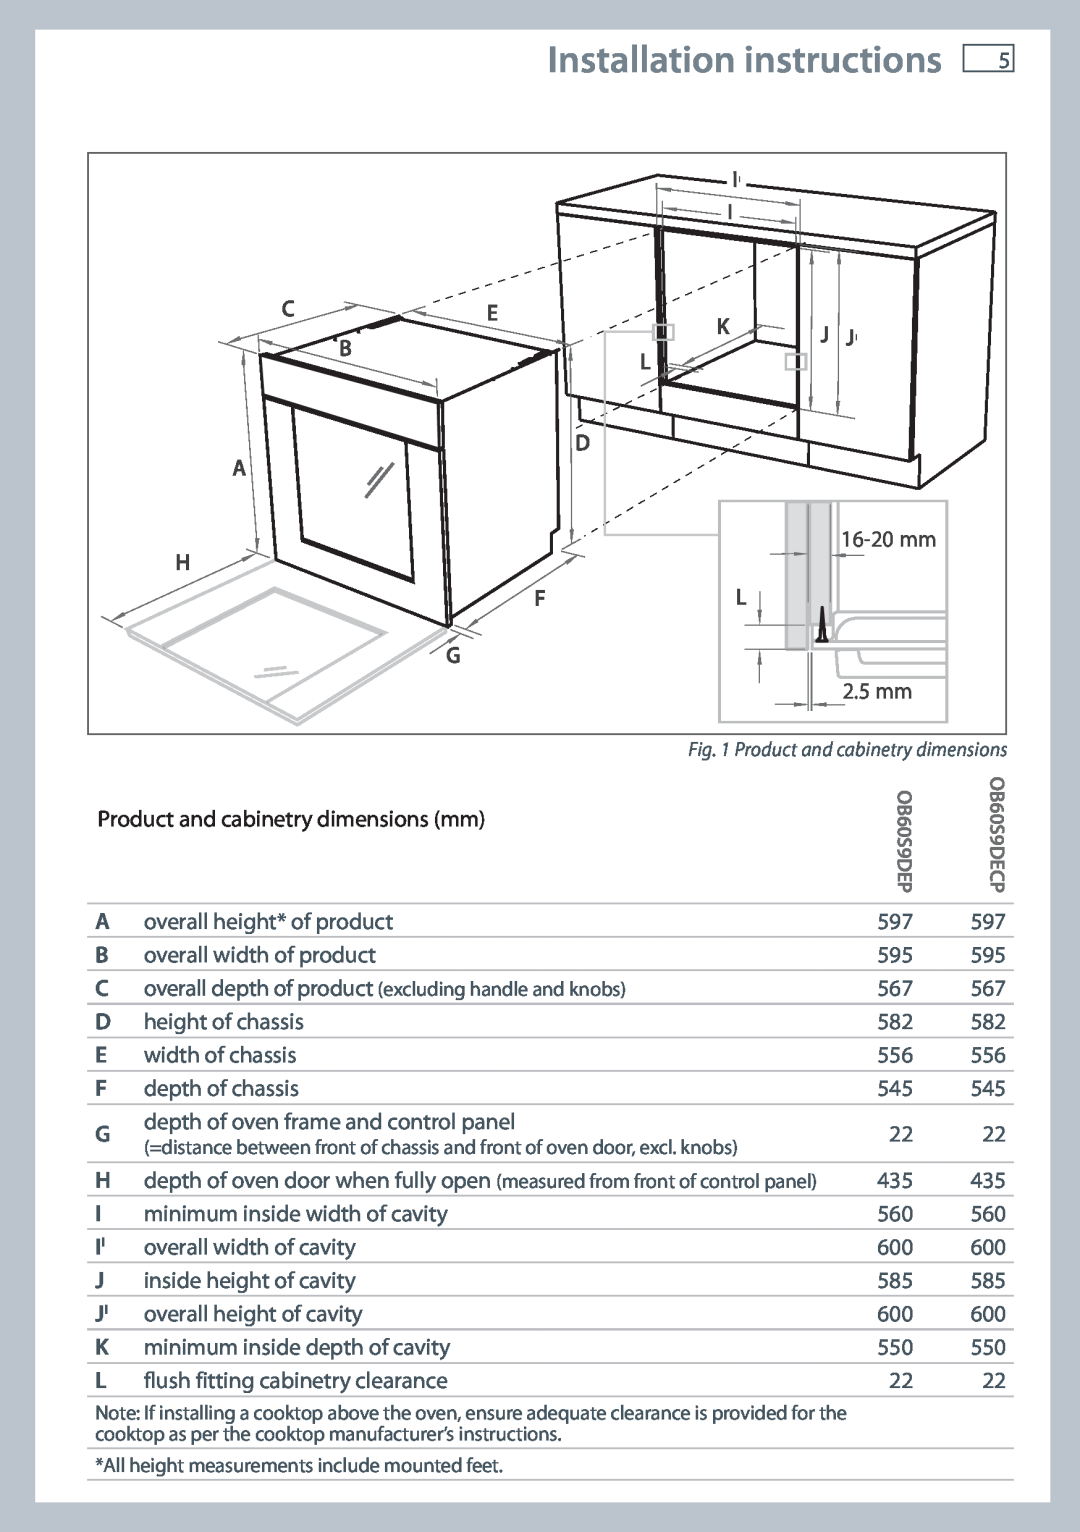 Fisher & Paykel OB60S9DECP Installation instructions, H Fl G, 16-20 mm 2.5 mm, Product and cabinetry dimensions mm 